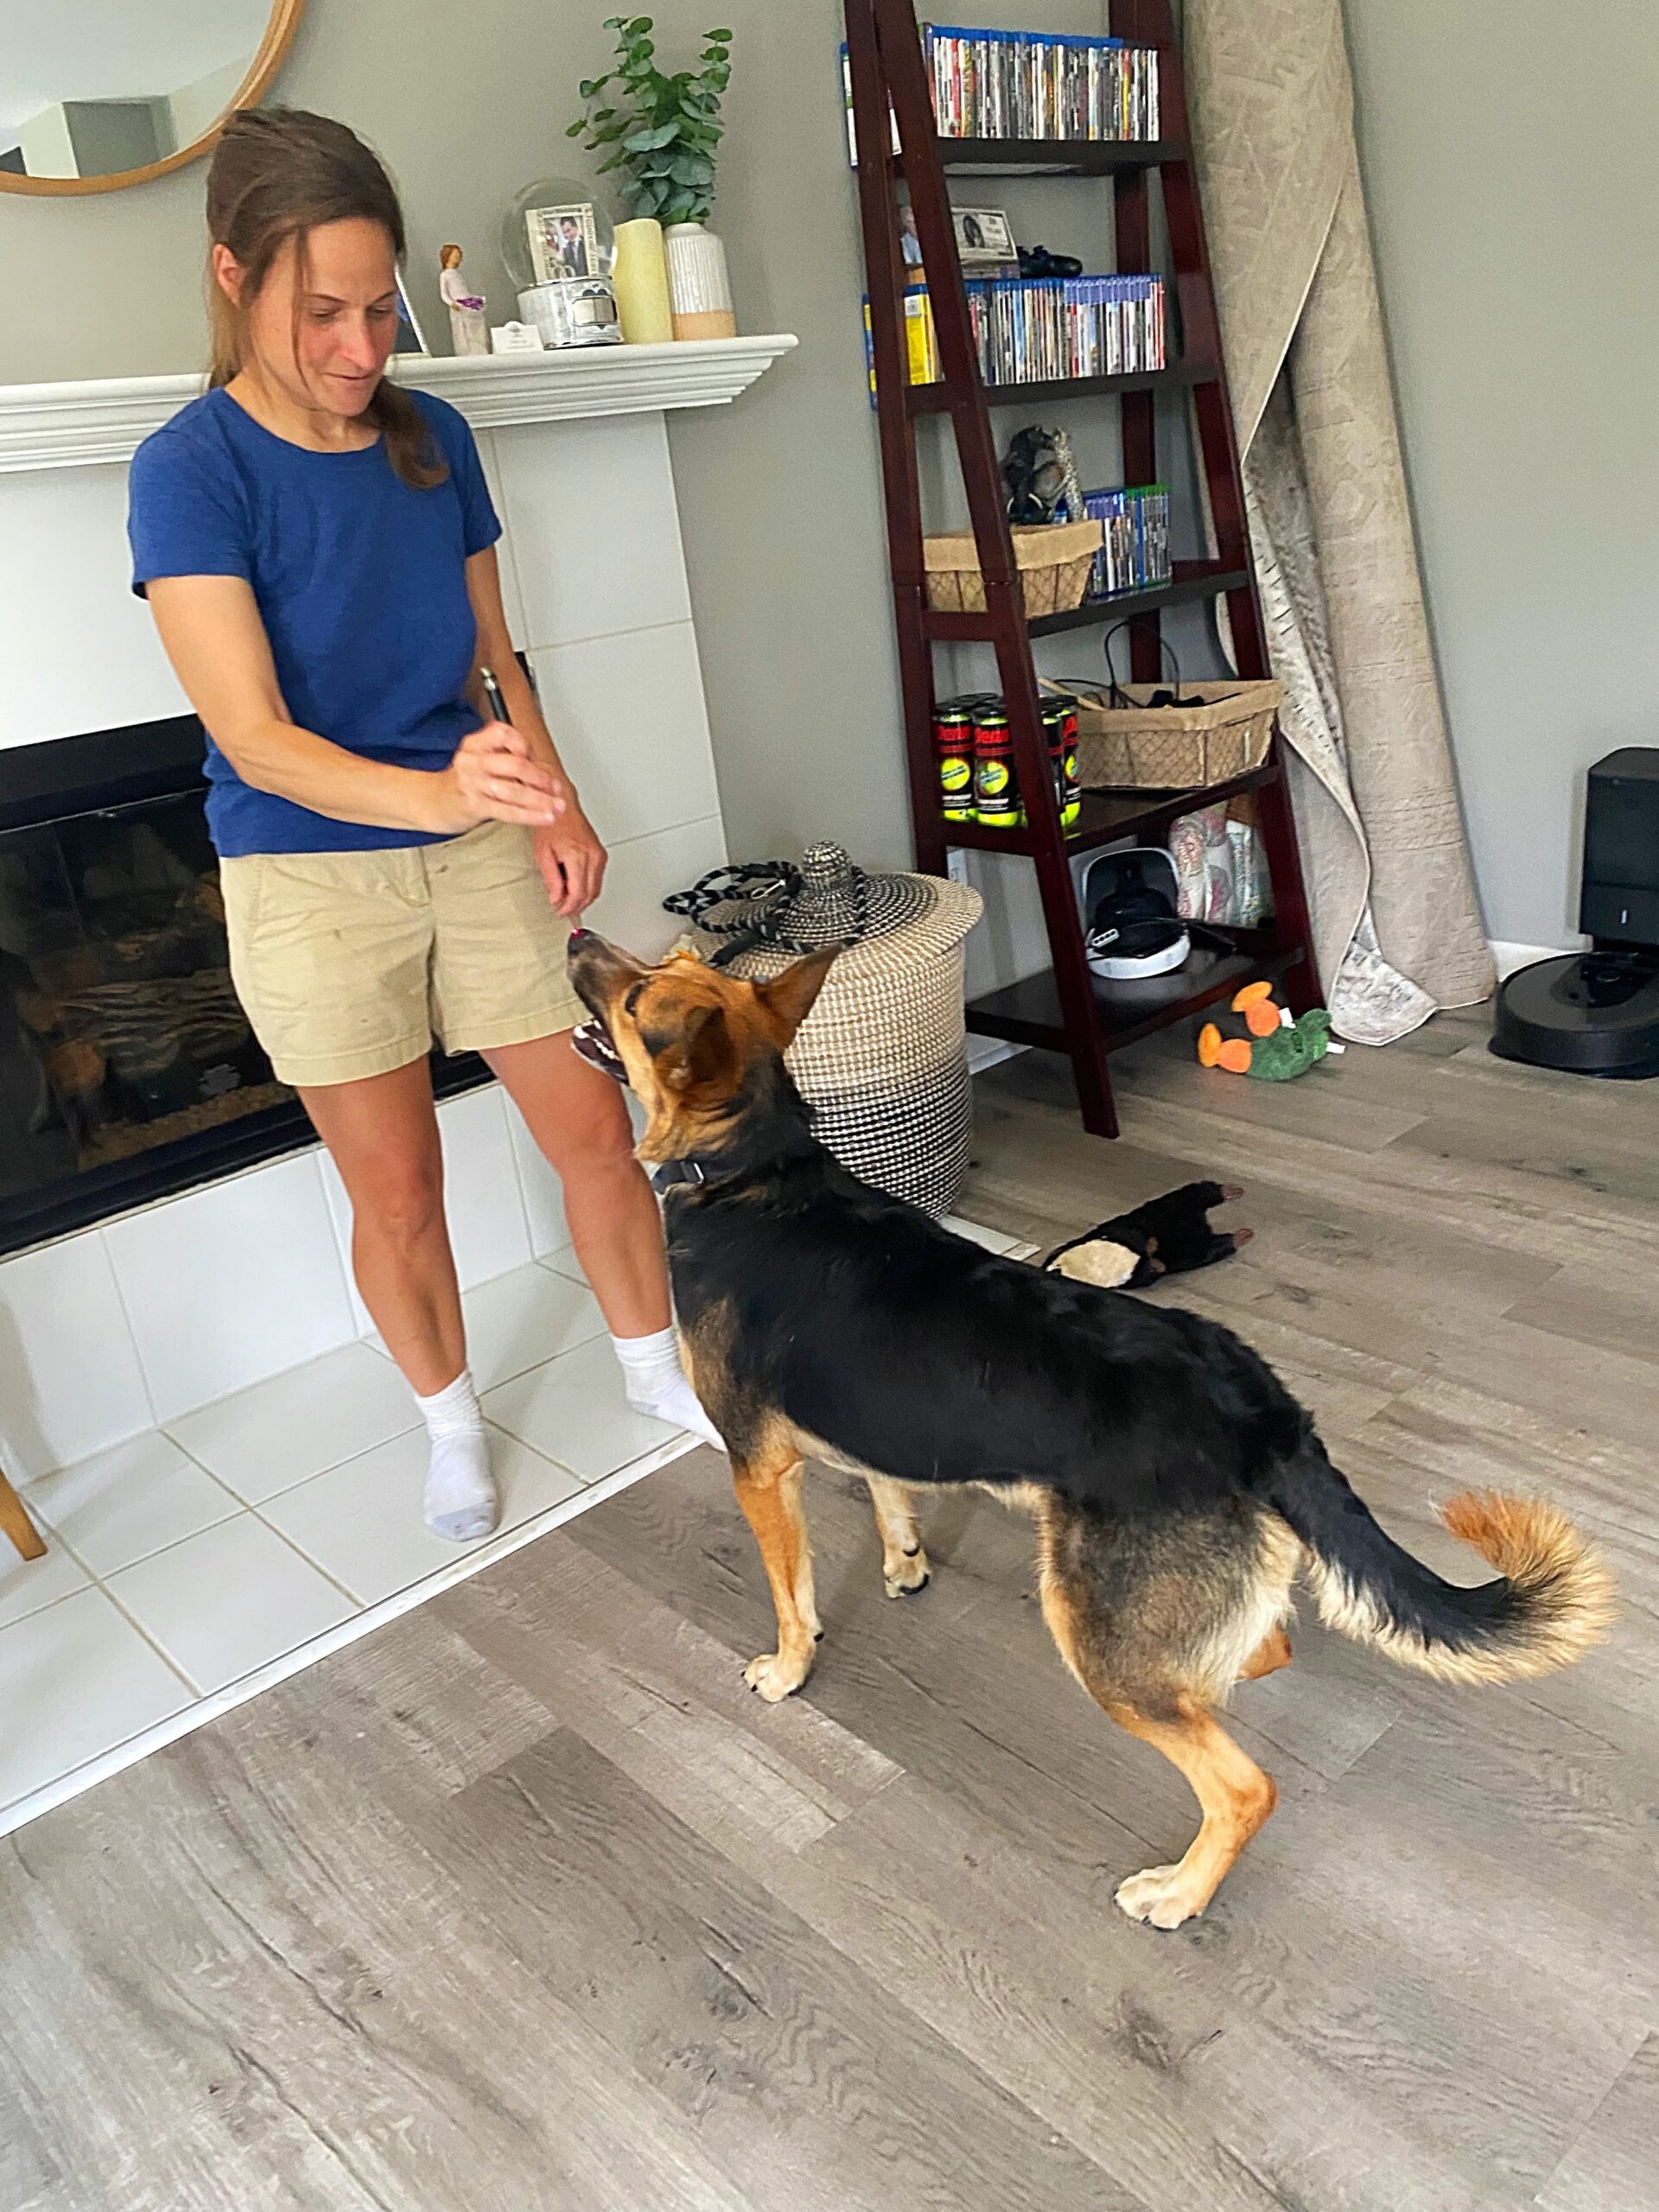 An image showcasing the benefits of hiring a professional pet sitter. The image features a pet sitter interacting with a happy dog in a home setting. The pet sitter is engaged in playtime with the dog, providing companionship and care.